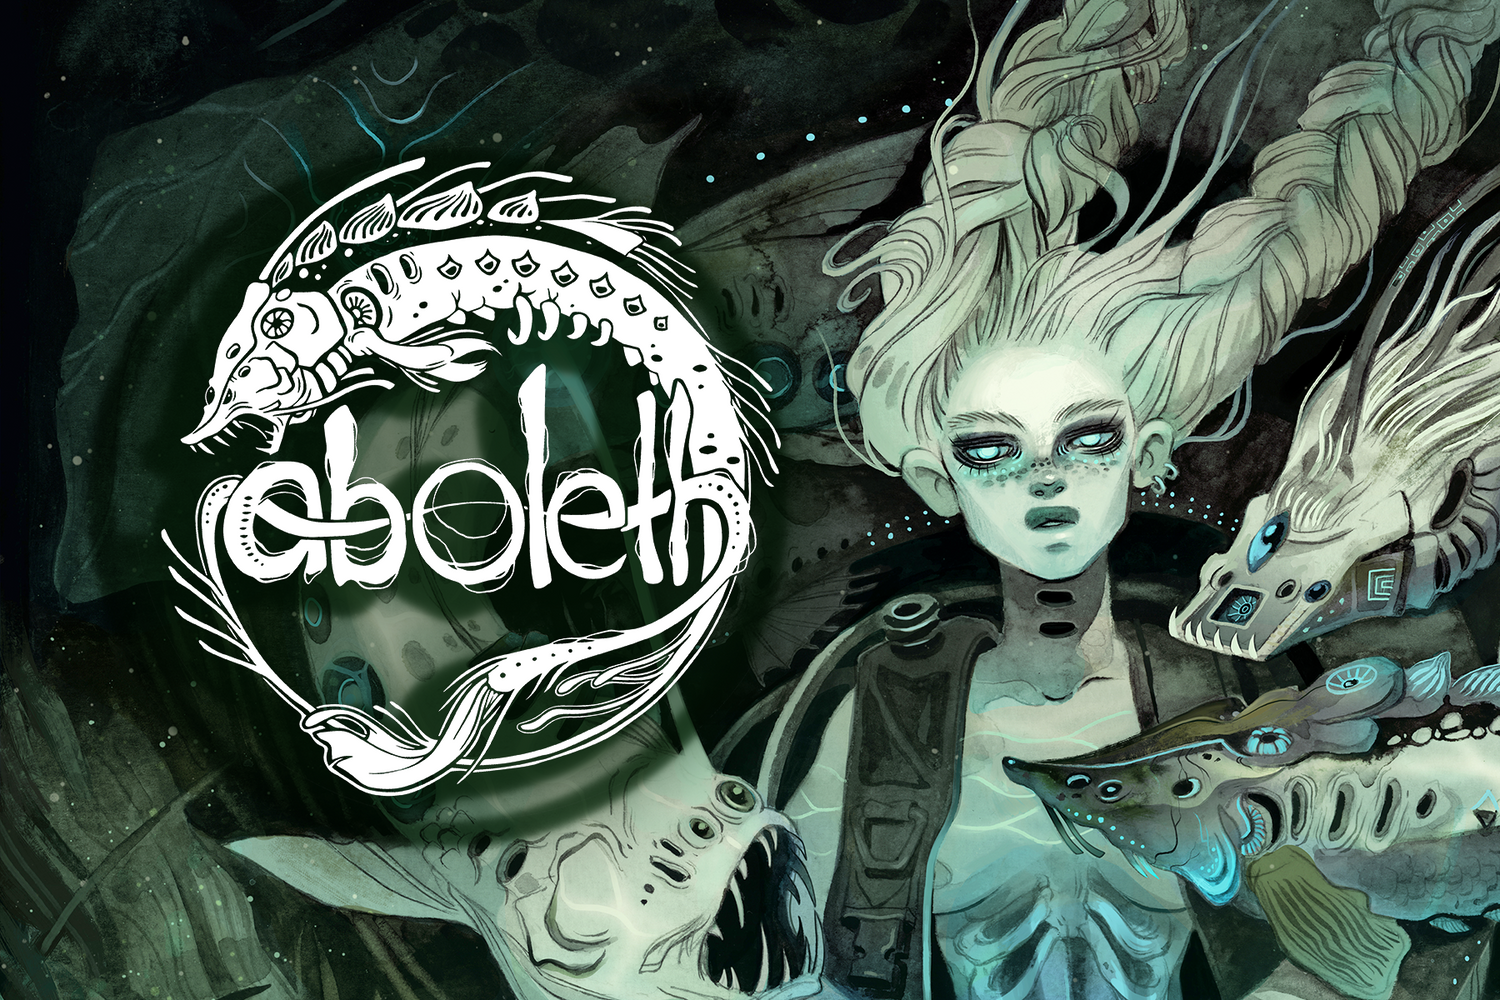 Aboleth logo on artwork of debut album Benthos. It shows underwater life with lady and sea monsters